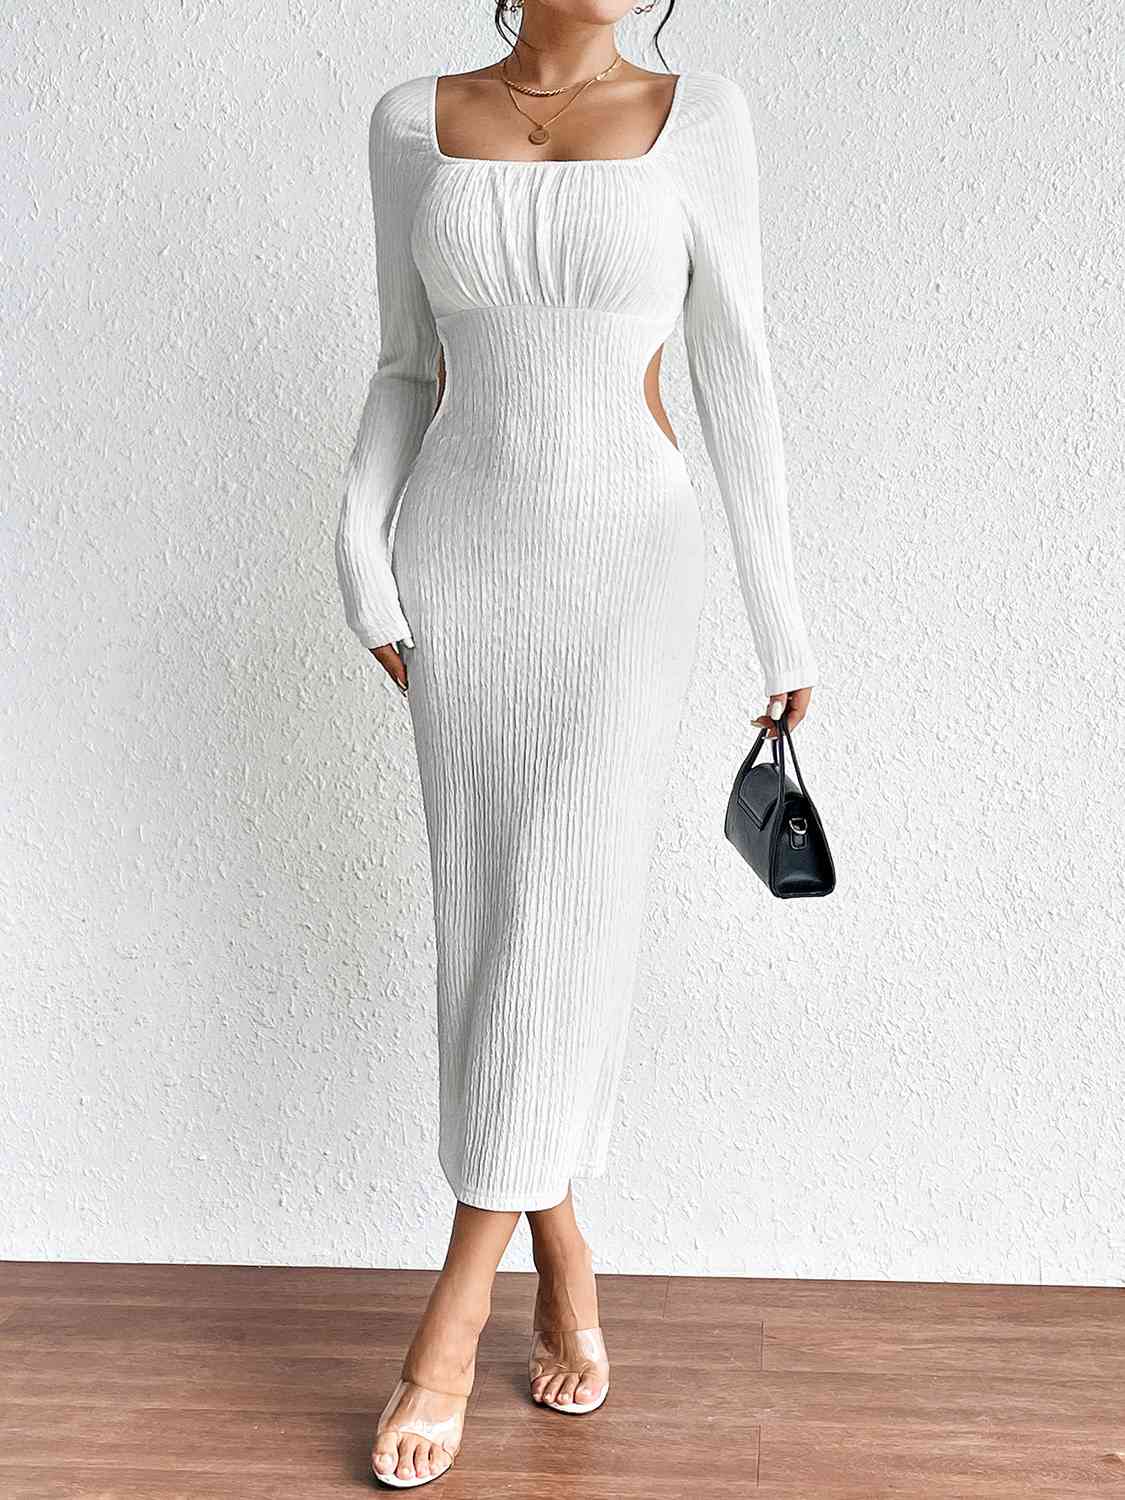 Square Neck Cutout Long Sleeve Dress - Wedeh's Fashion